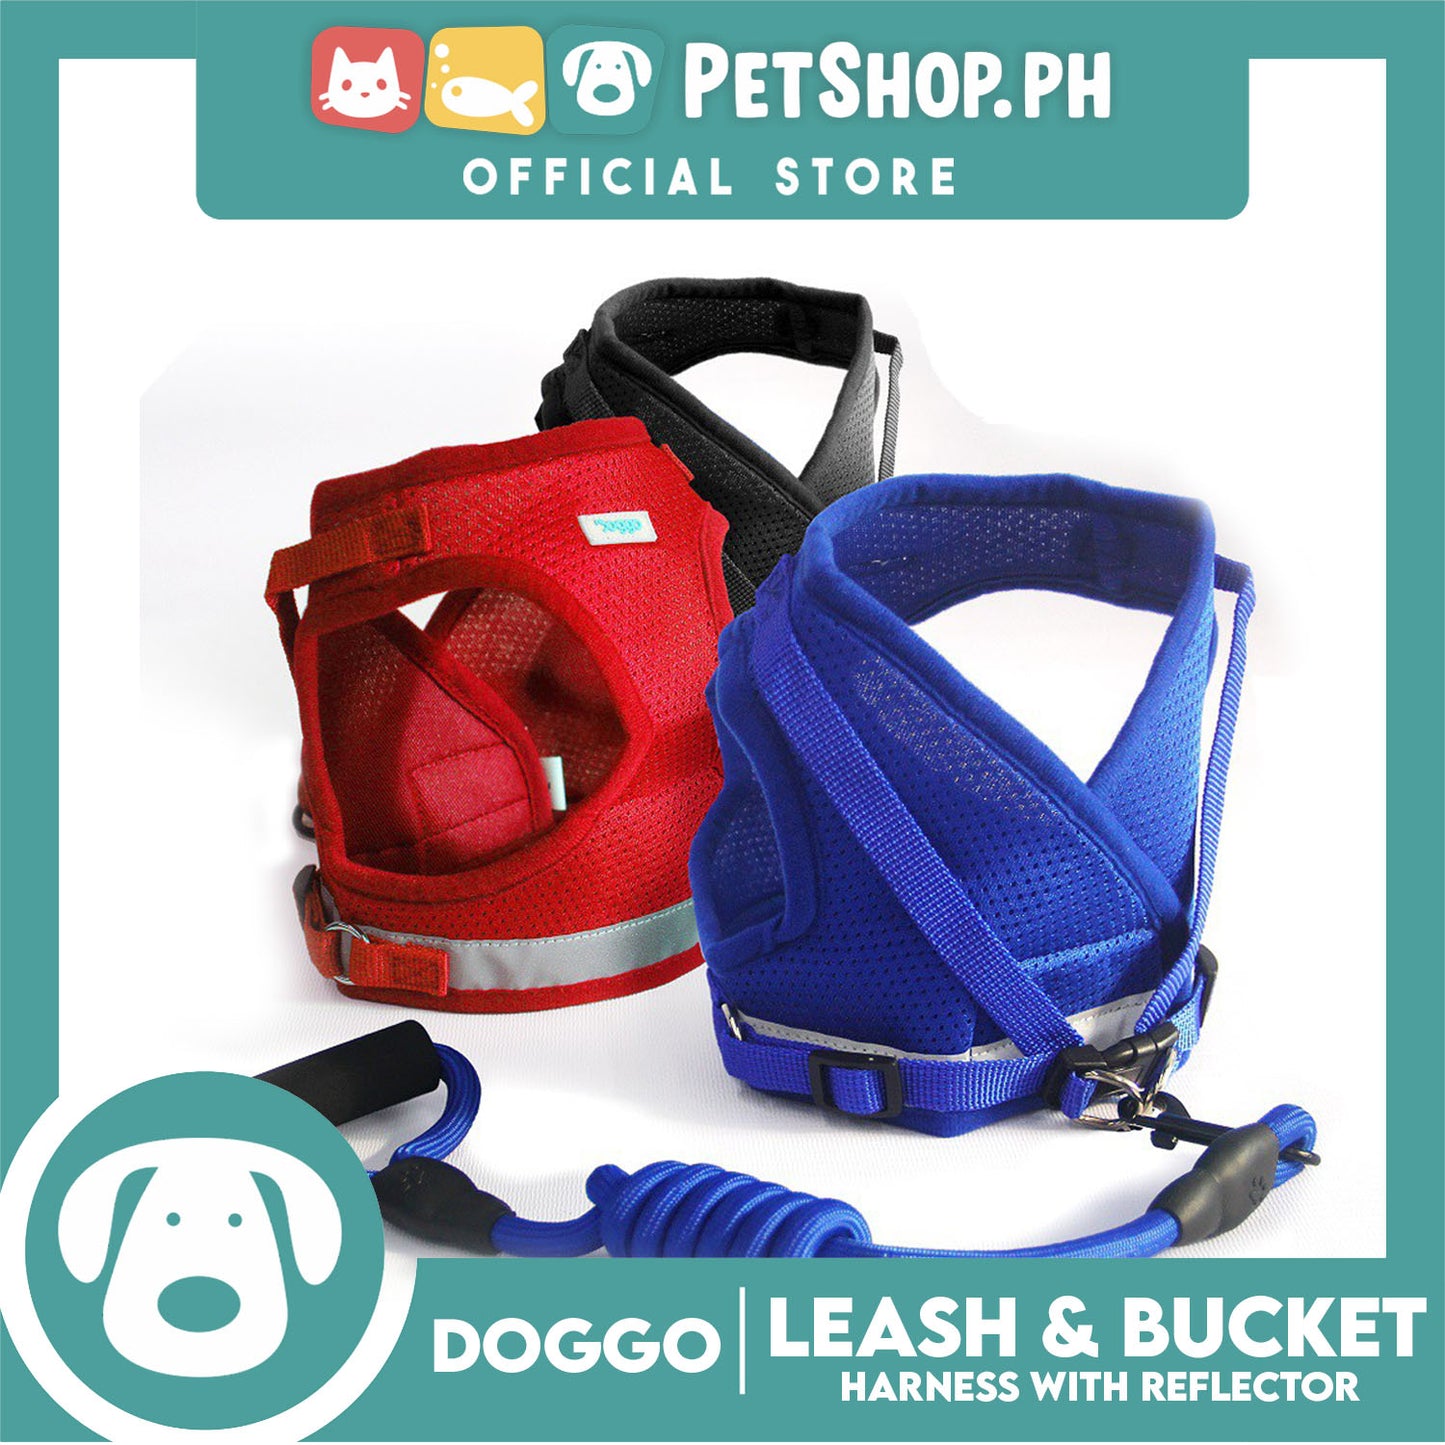 Doggo Leash and Bucket Harness with Reflector Medium (Red) Perfect Set for Your Dog